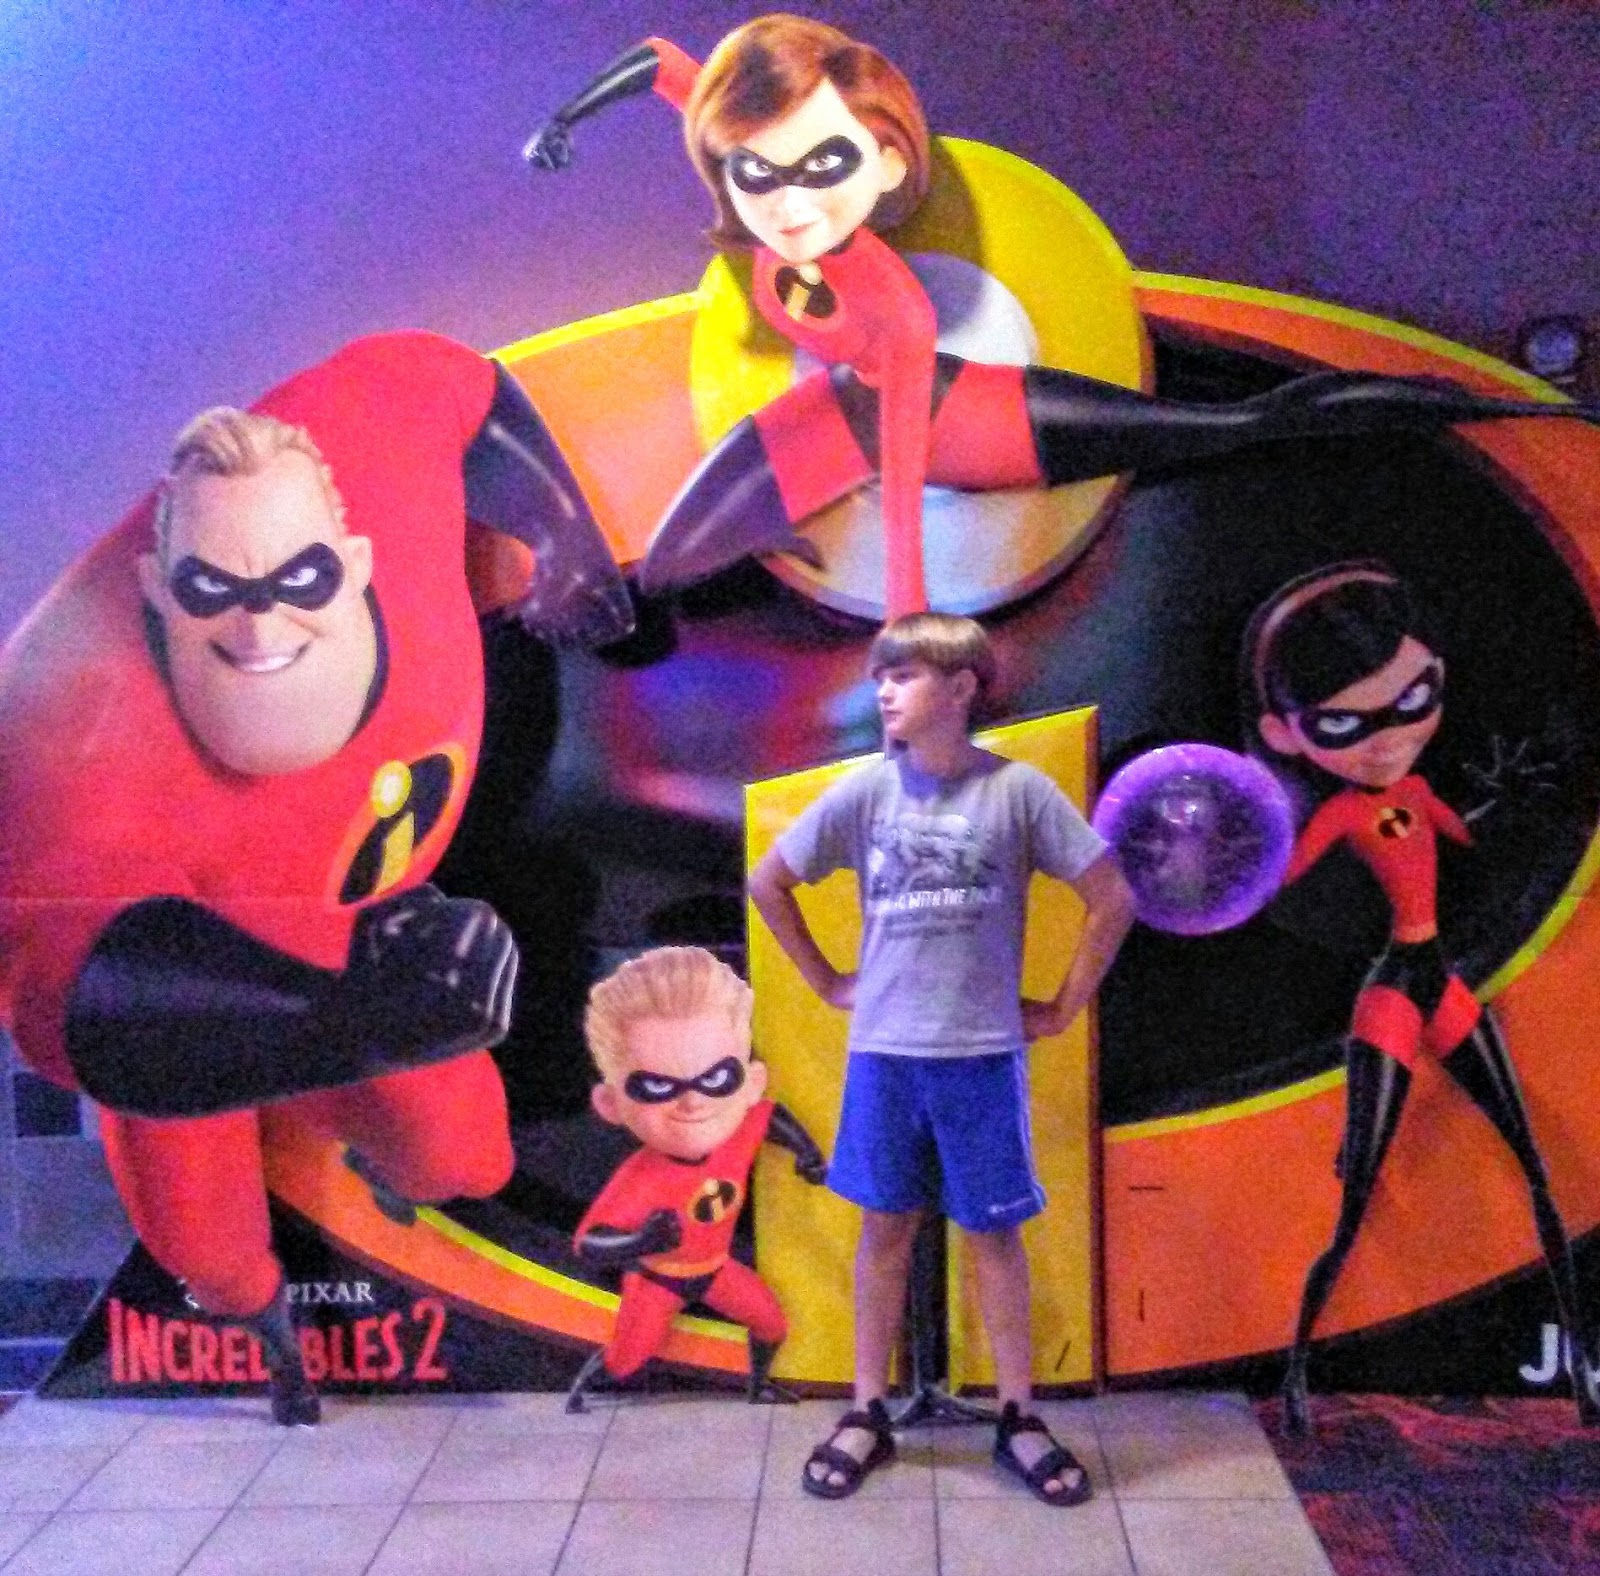 Mom Knows Best: The Incredibles Are Back And Incredibles 2 Is Awesome!